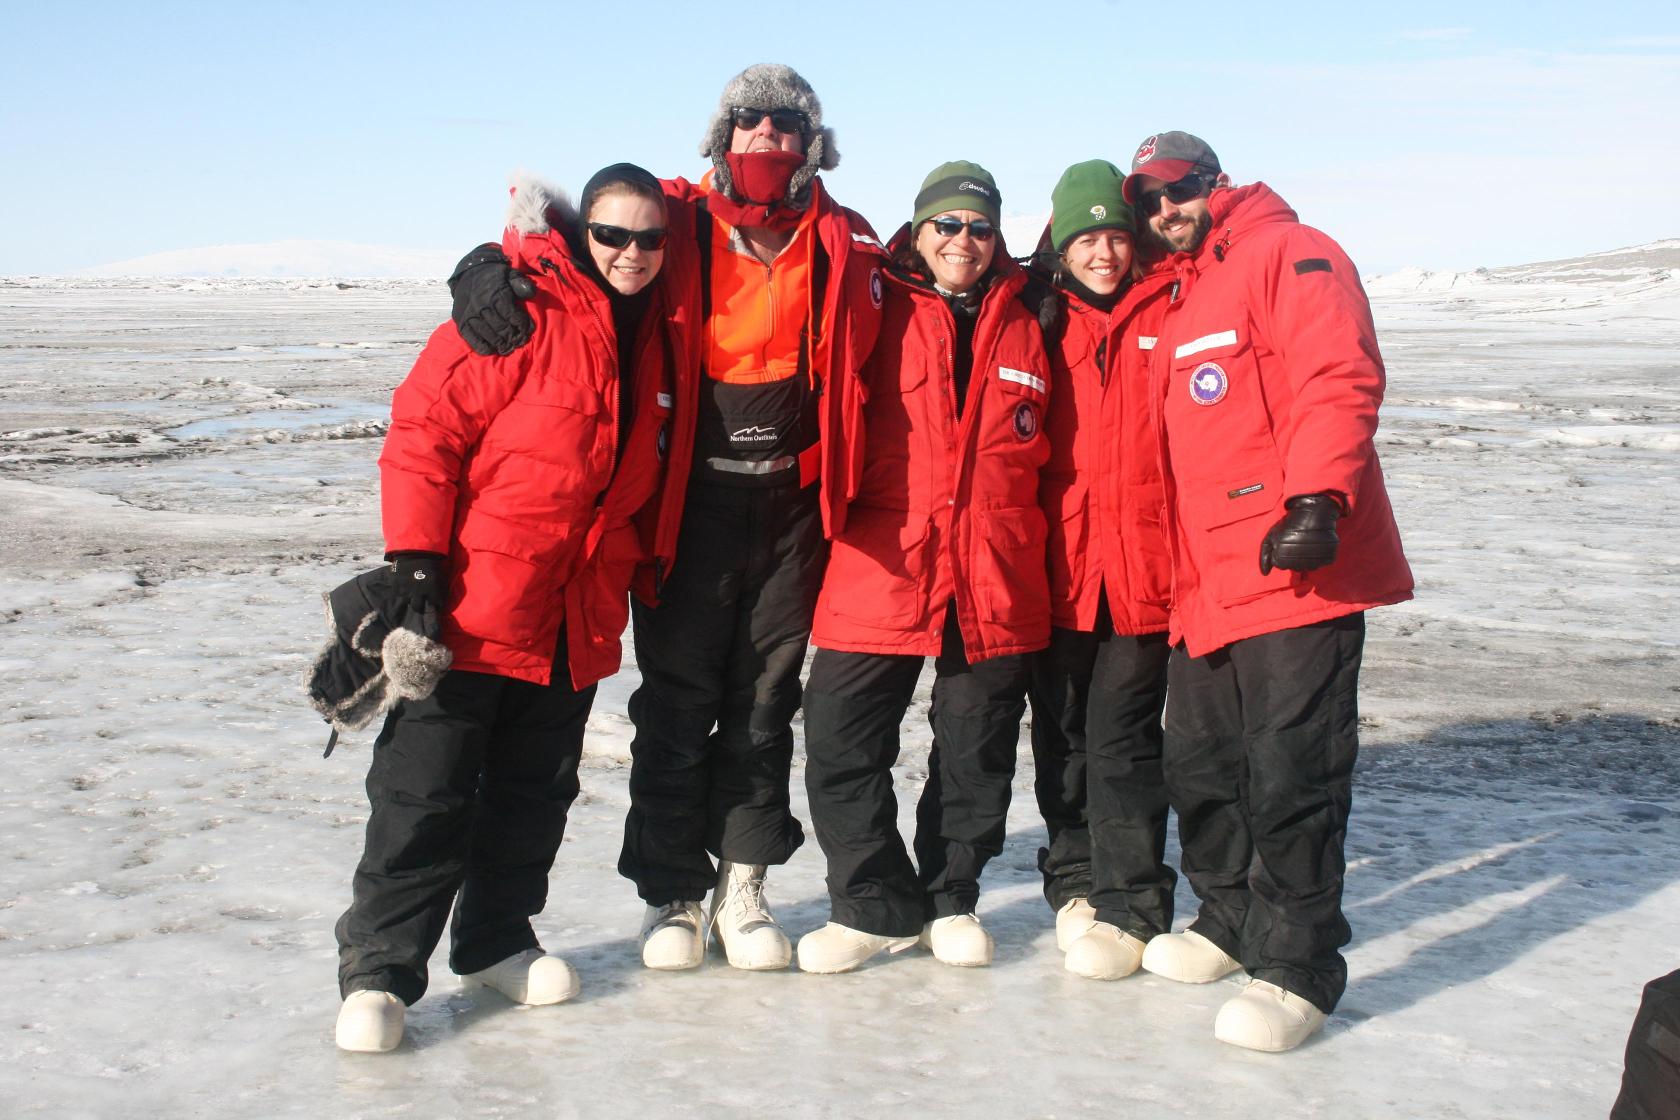 Gretchen Hofmann and her students on the ice in Antarctica